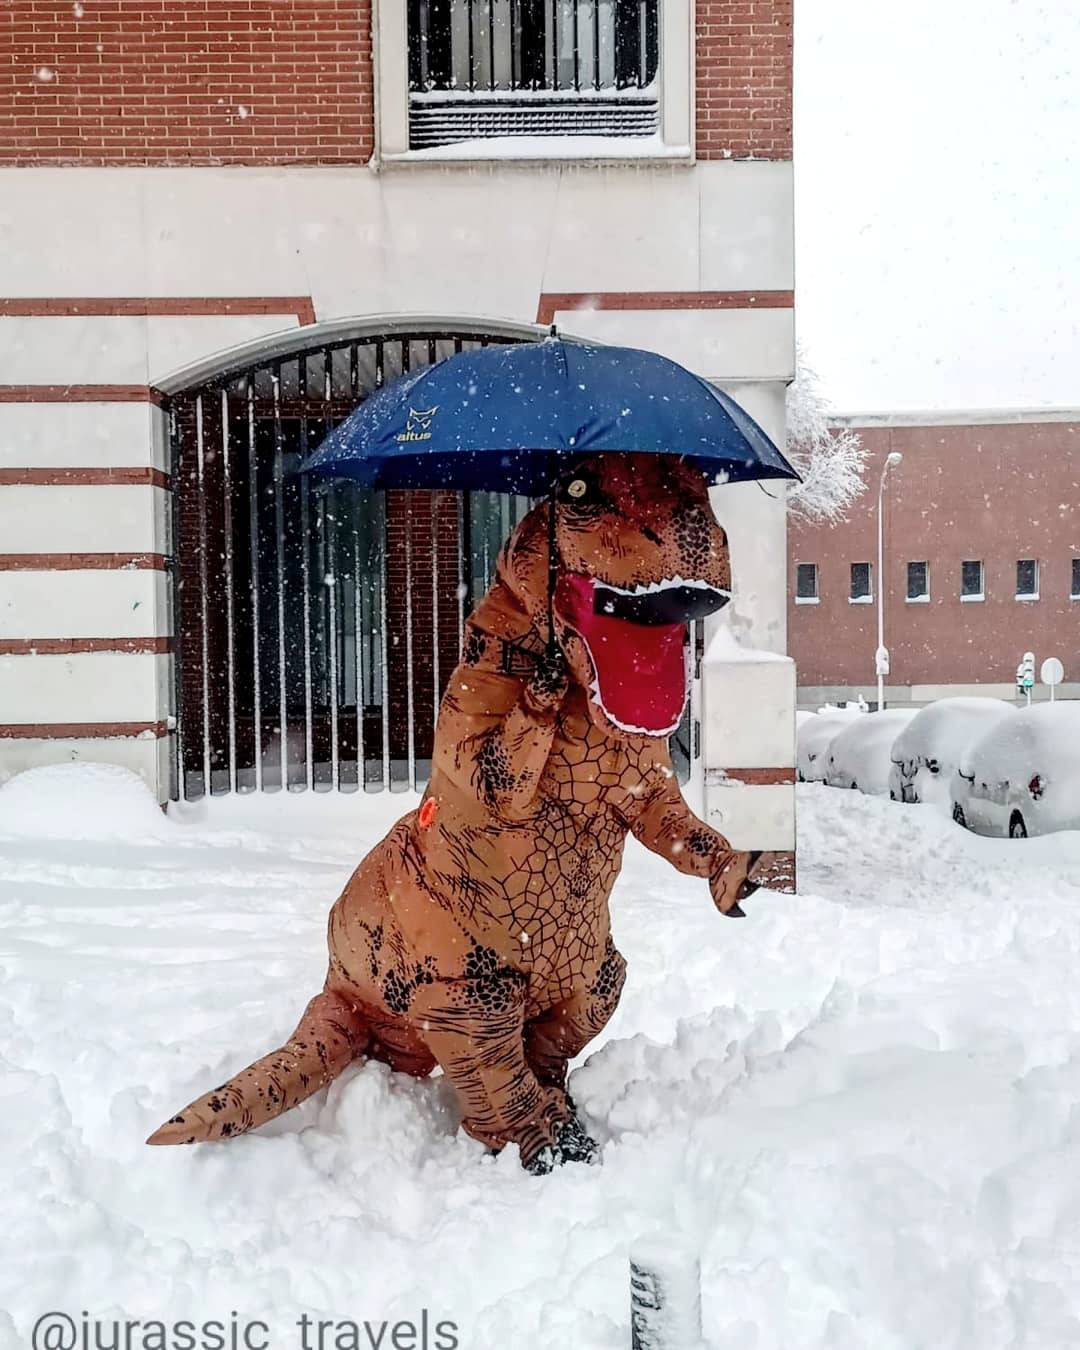 T-Rex protects itself from the falling snow in Madrid